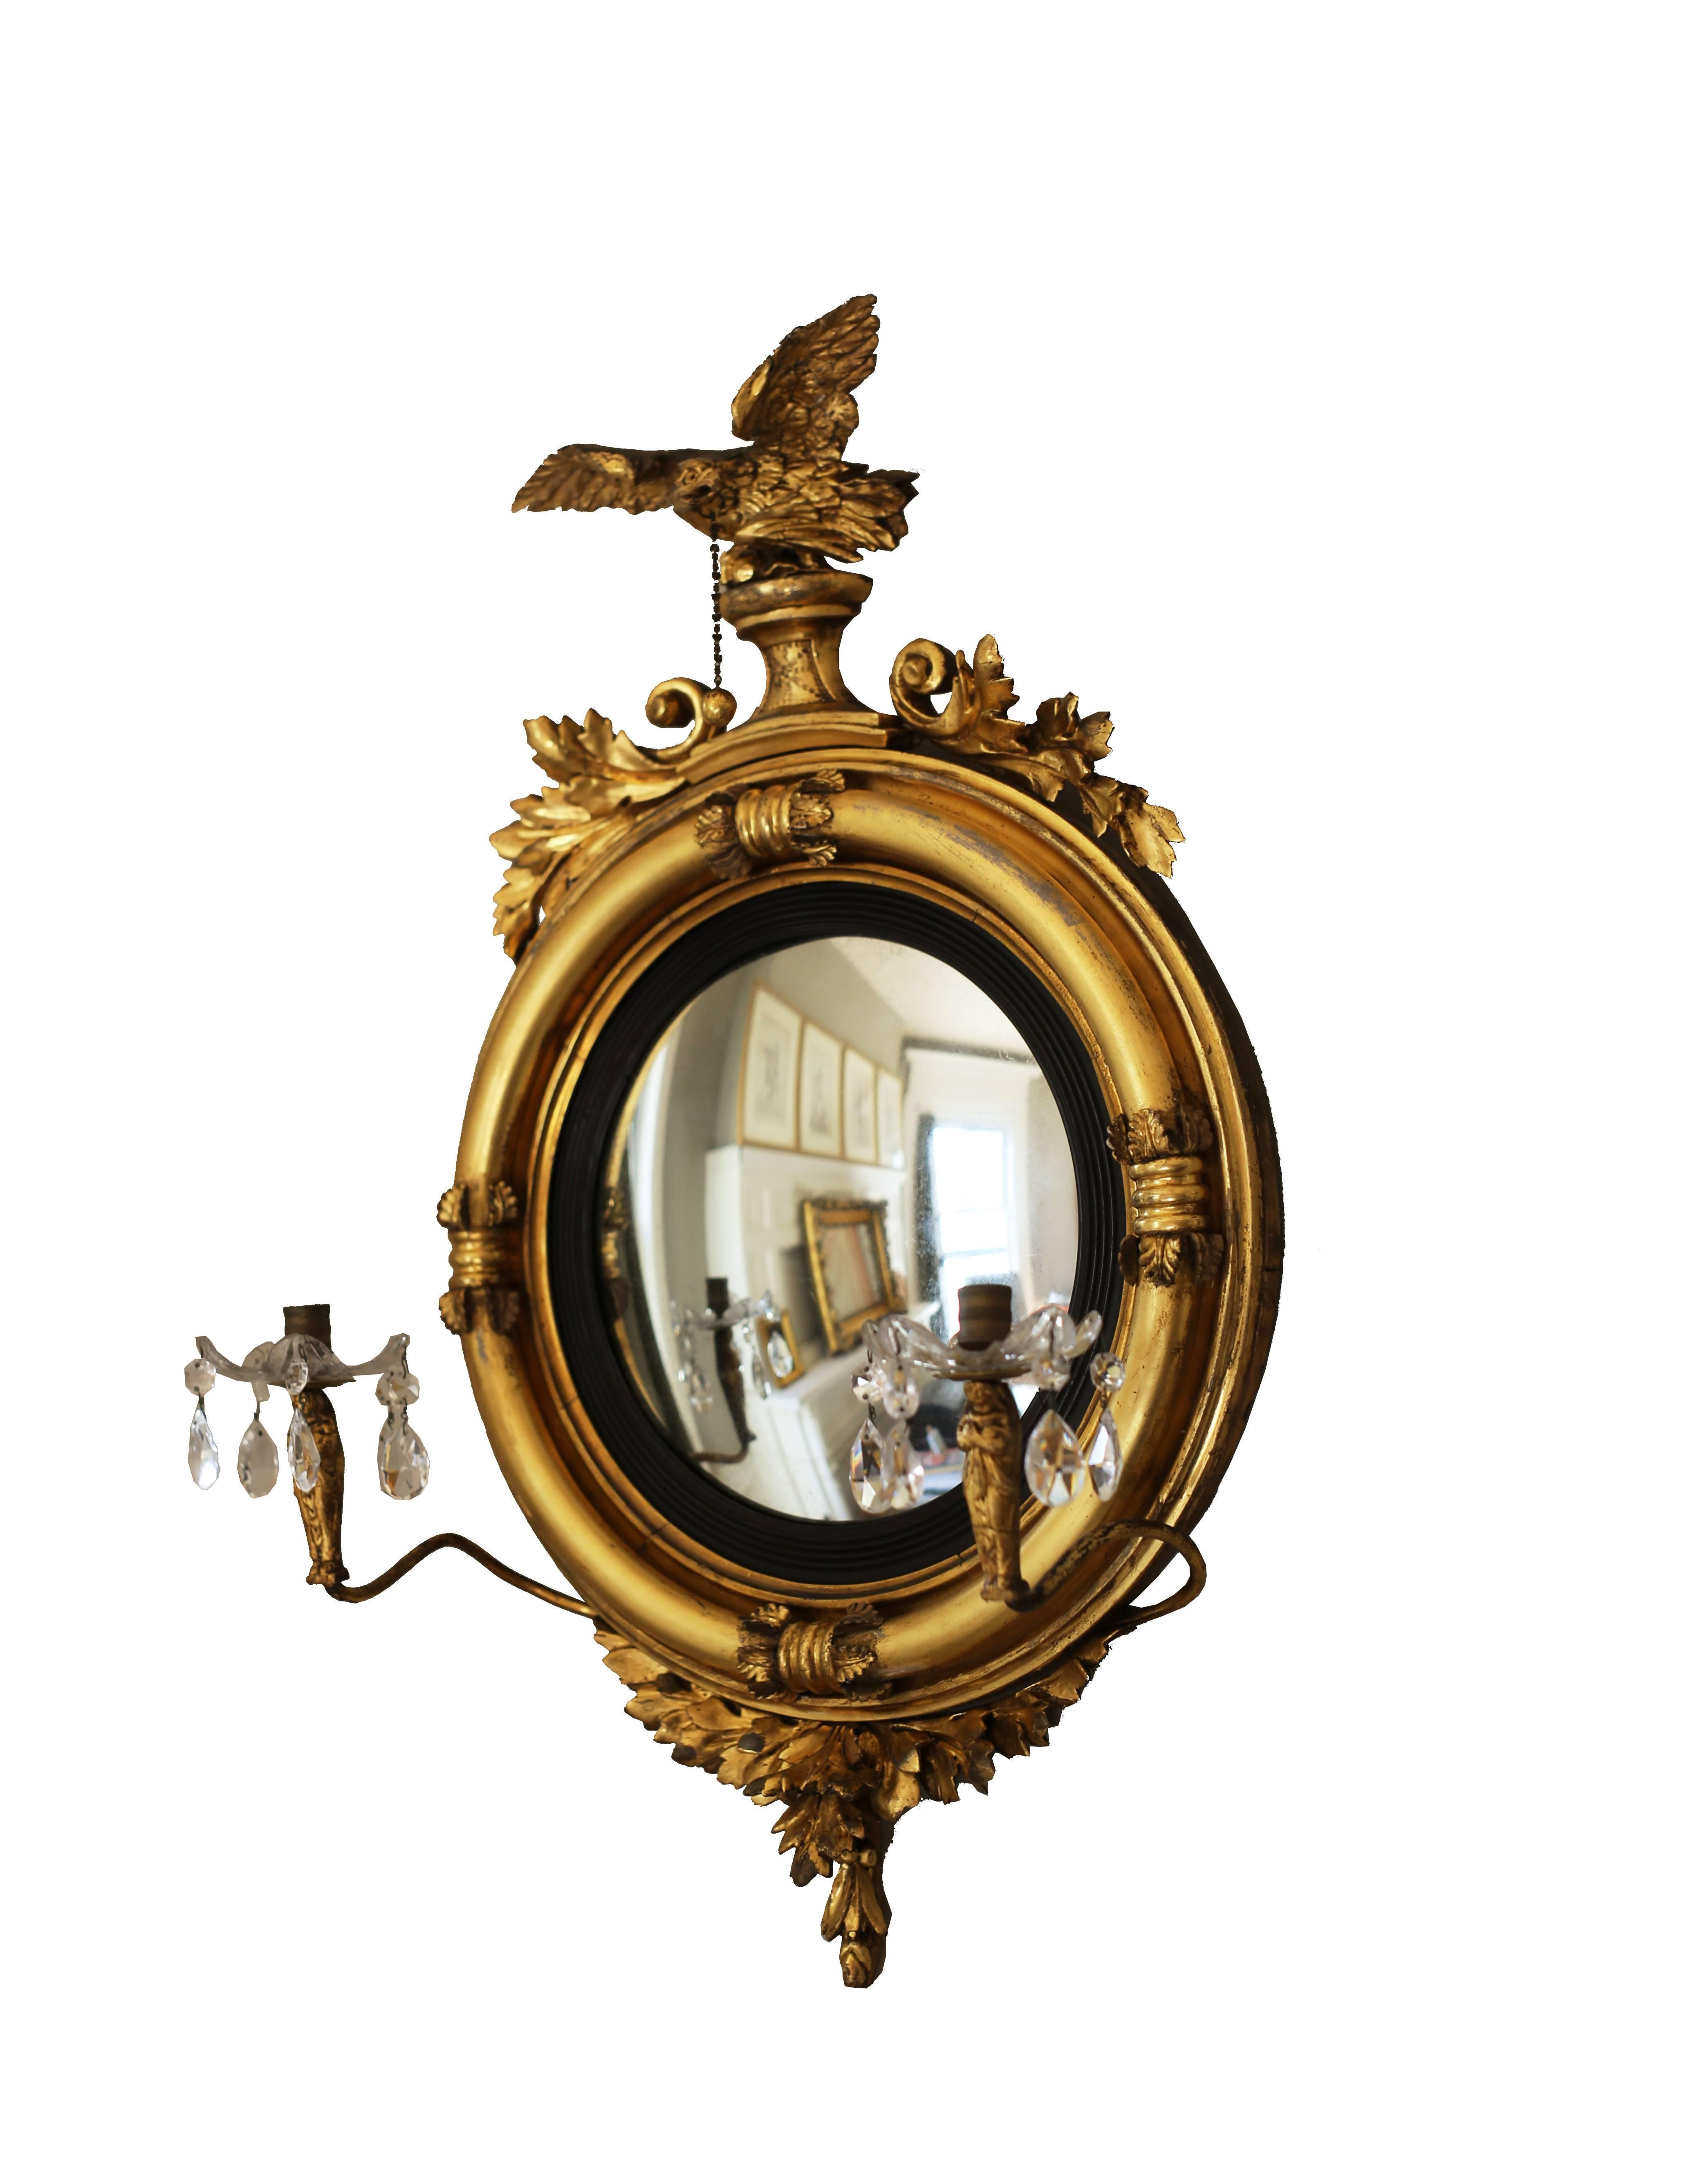 A rare diminutive girandole mirror, circa 1815, in extraordinary original condition and possibly American. The looking glass features a bold acanthus apron, ebonized reeded filet, surmounted by an eagle bearing a ball and chain from its beak.